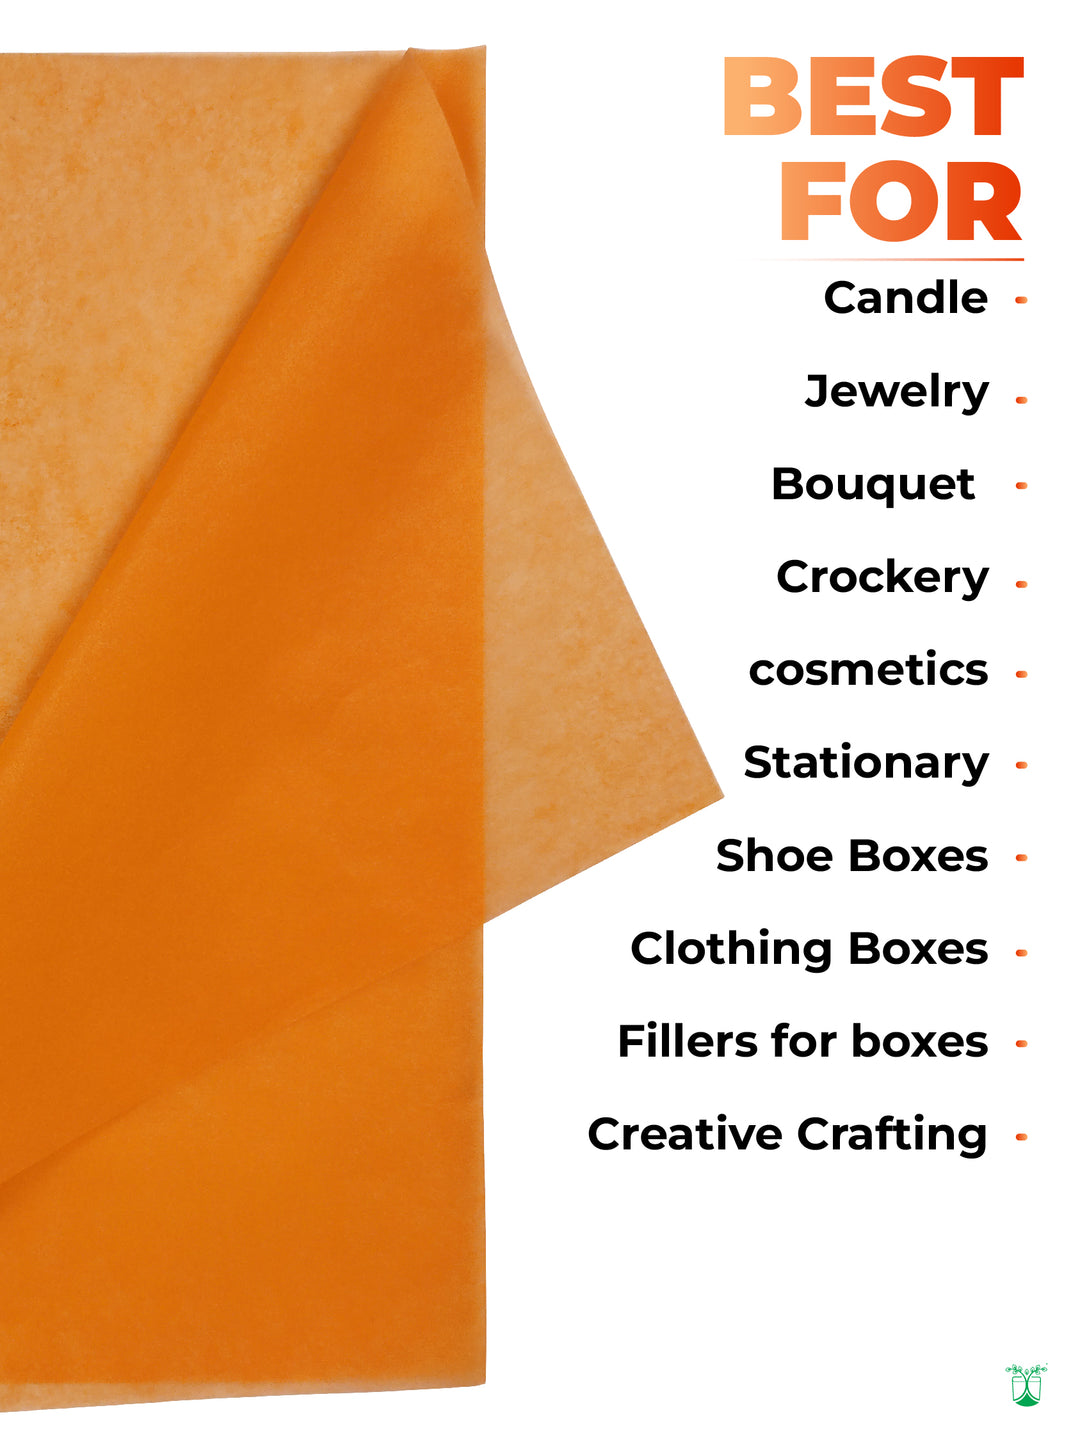 Orange Tissue Wrapping Paper for Sustainable Packaging